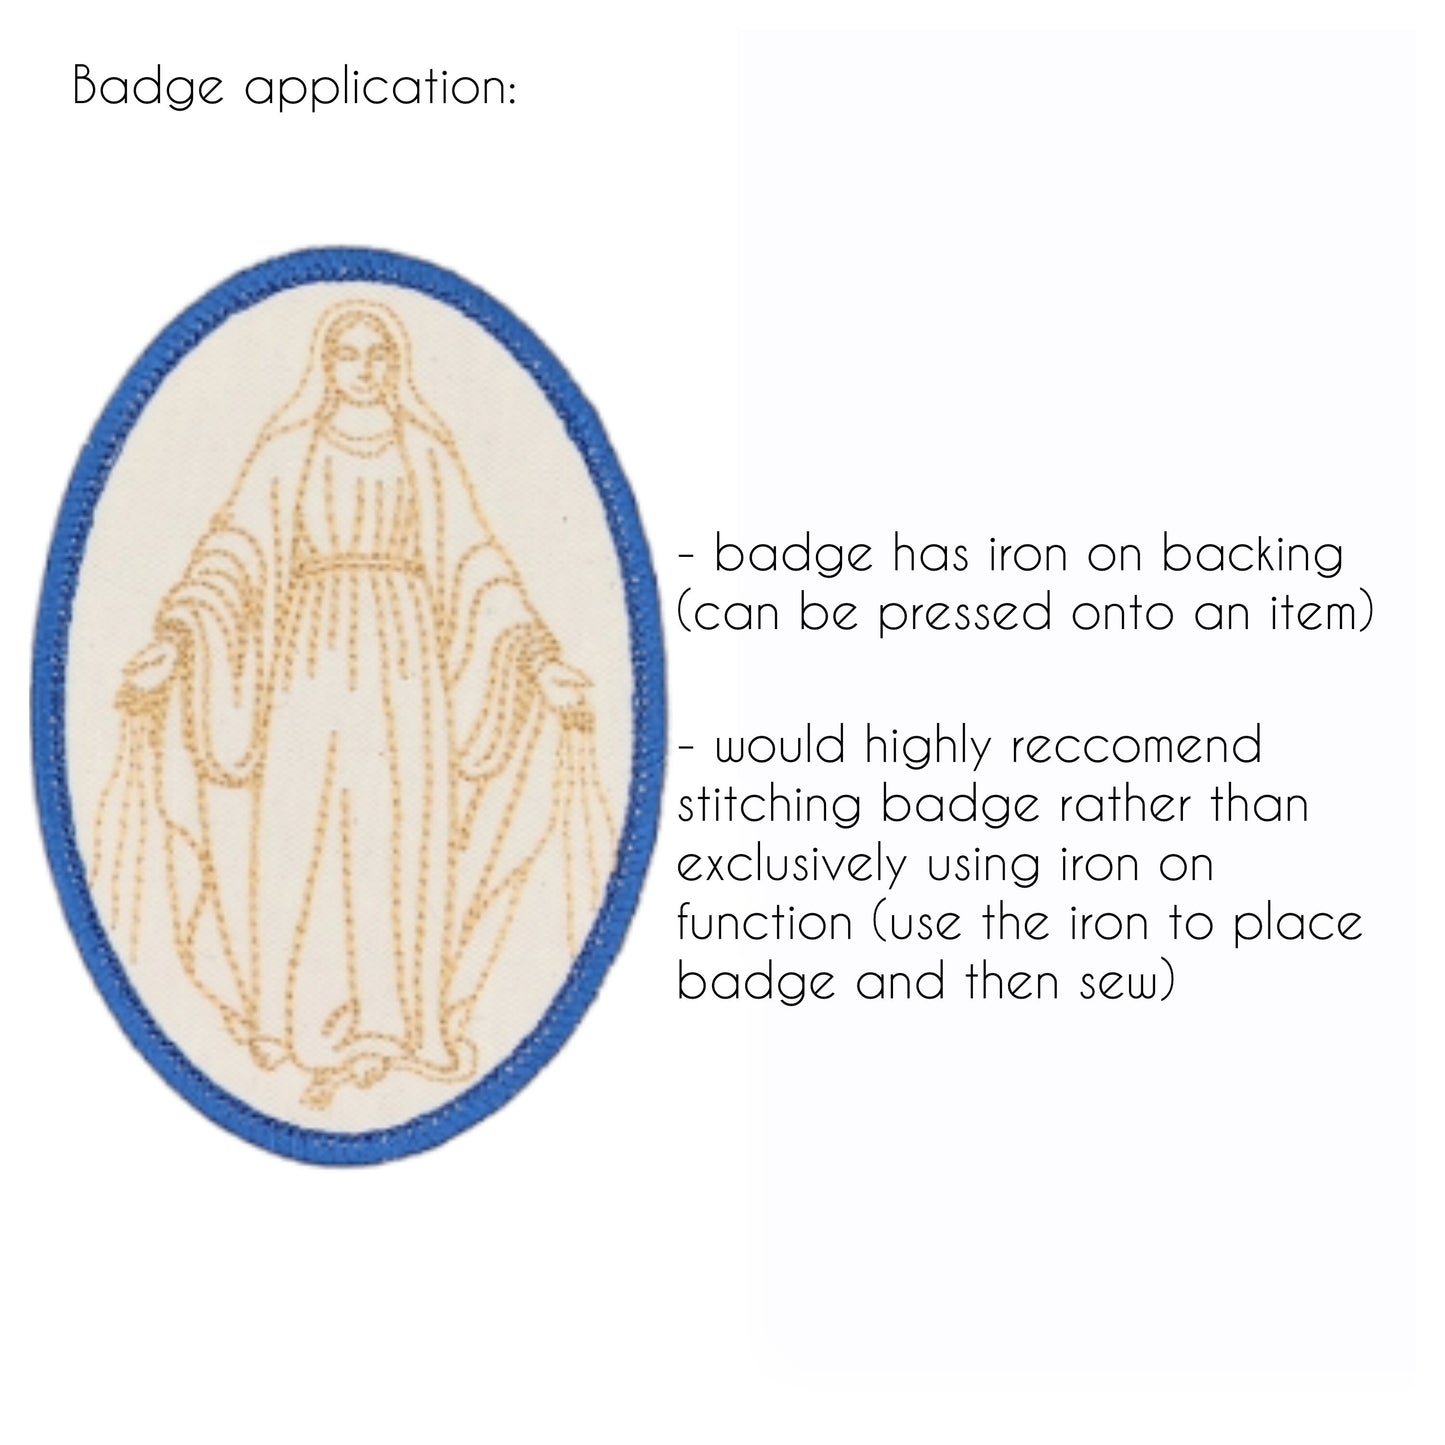 Our Lady of Grace badge, religious patch, iron on badge, sew on patch, embroidered badge, embroidered patch, Heart of Mary, pilgrimage